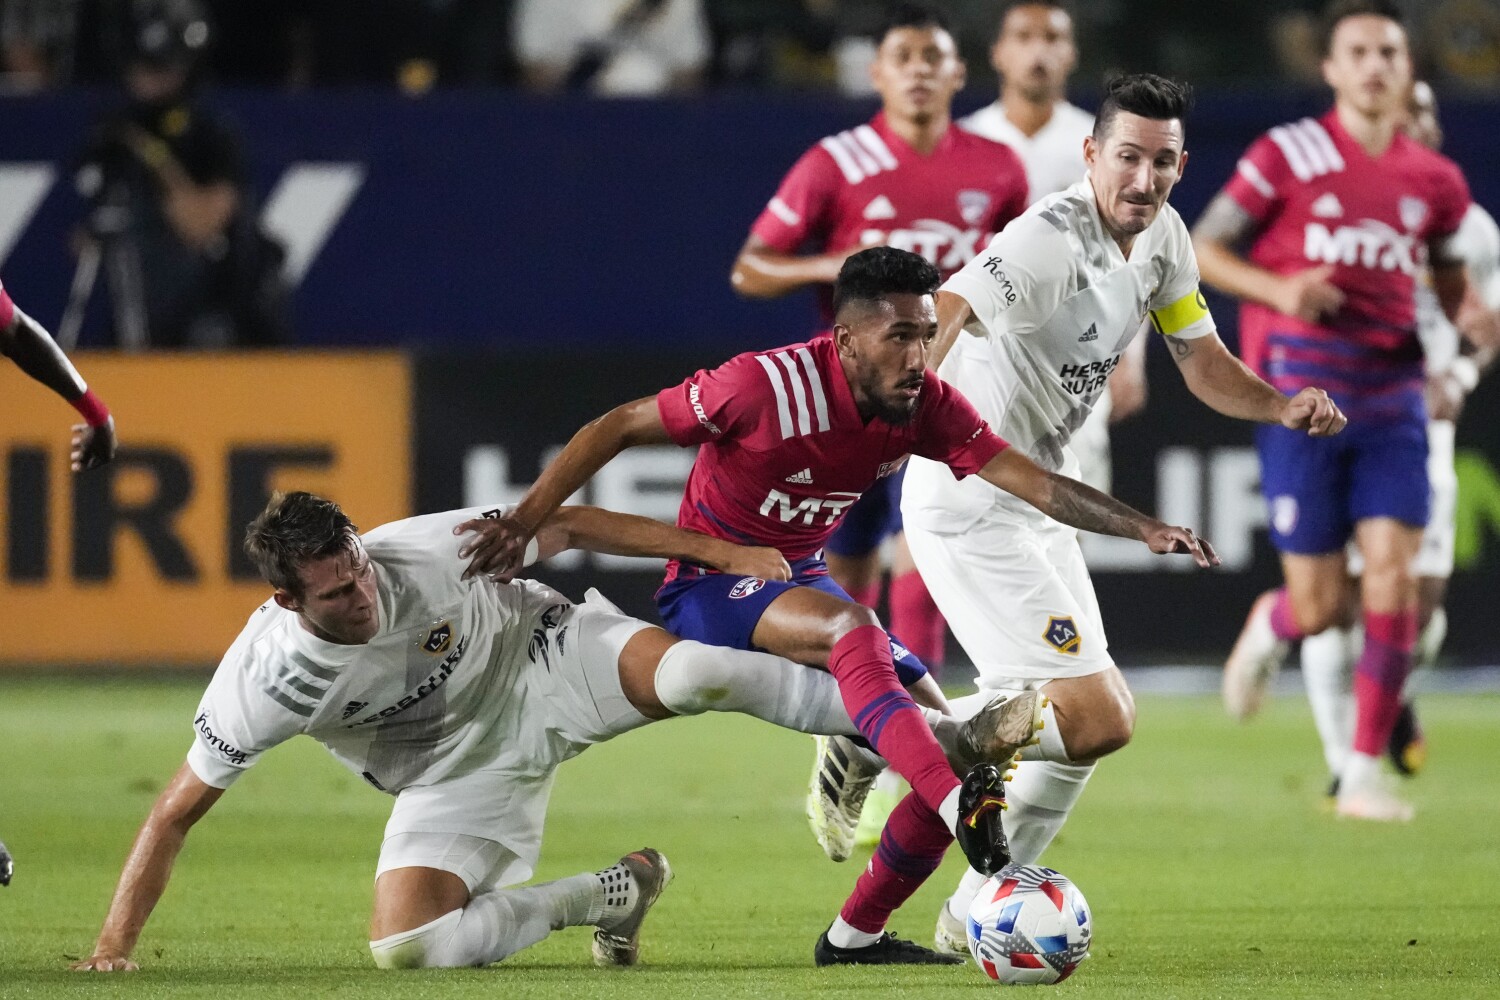 Short-handed Galaxy have enough to beat FC Dallas